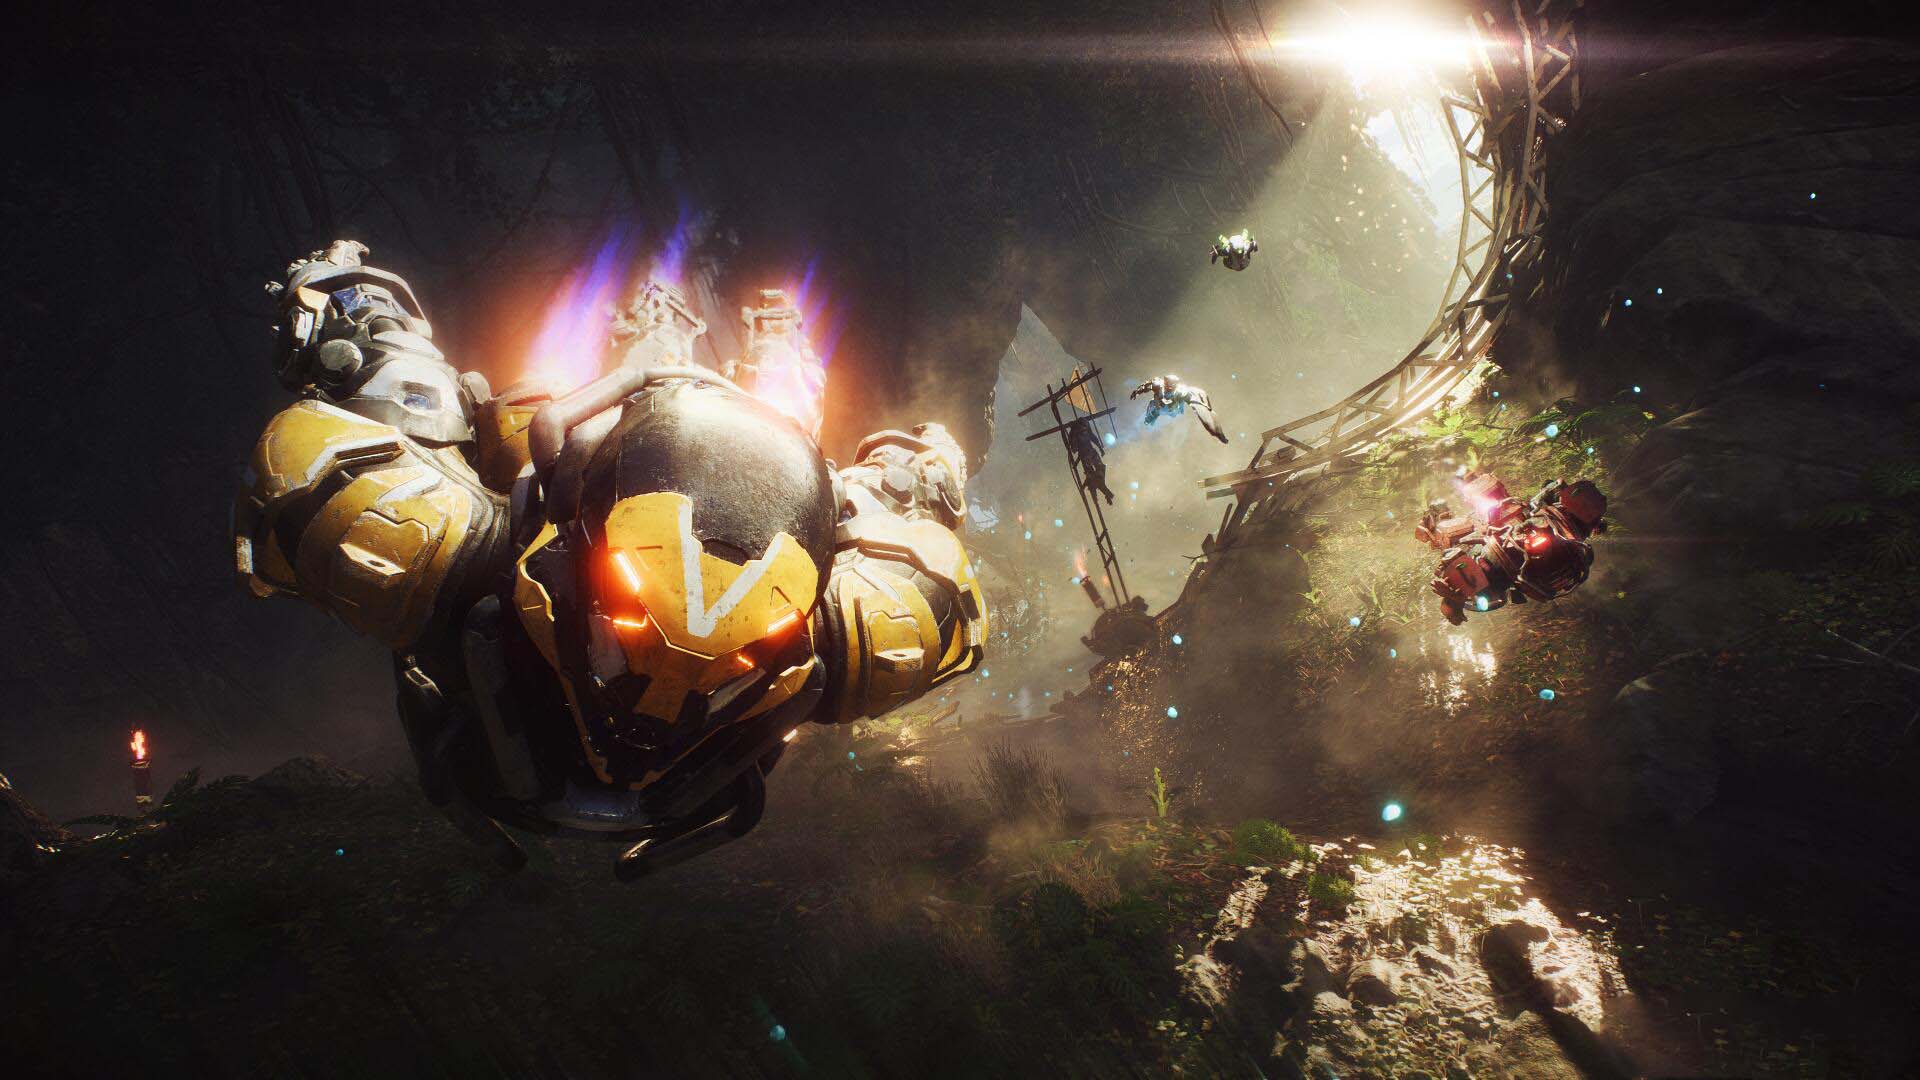 EA Play 2019 Schedule Announced, Anthem is Missing